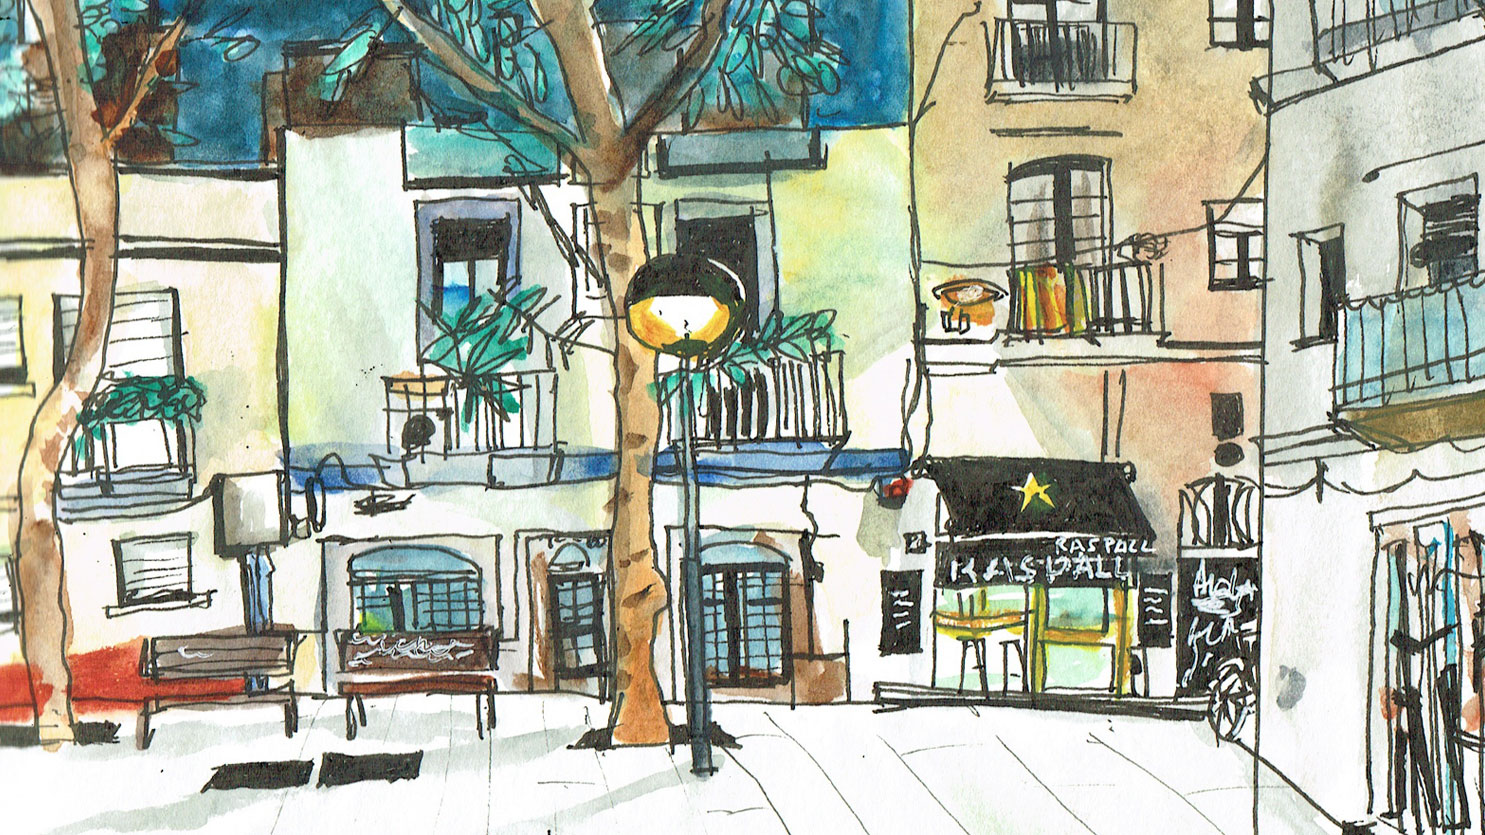 Urban sketching project - My sketches